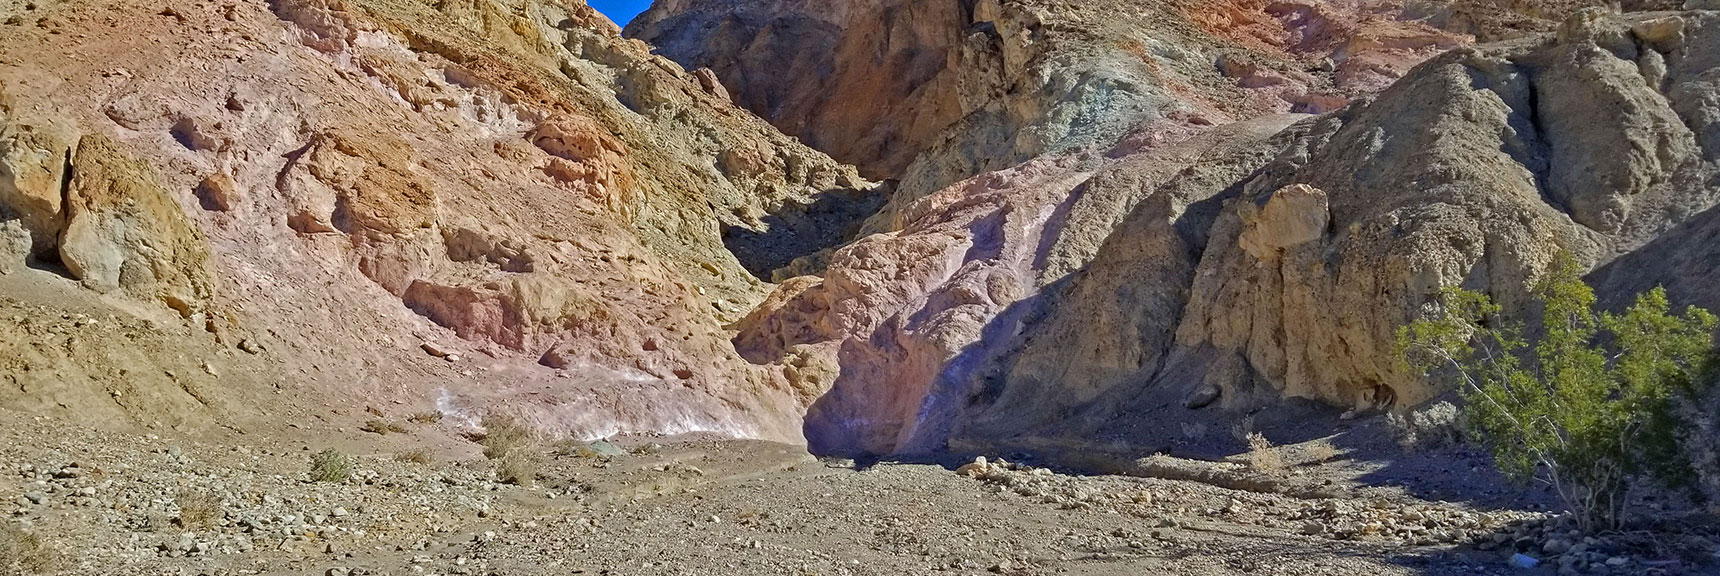 View Up 2nd Dip Canyon Toward Immediate Dry Waterfall Barrier | Artists Drive Hidden Canyon Hikes | Death Valley National Park, California